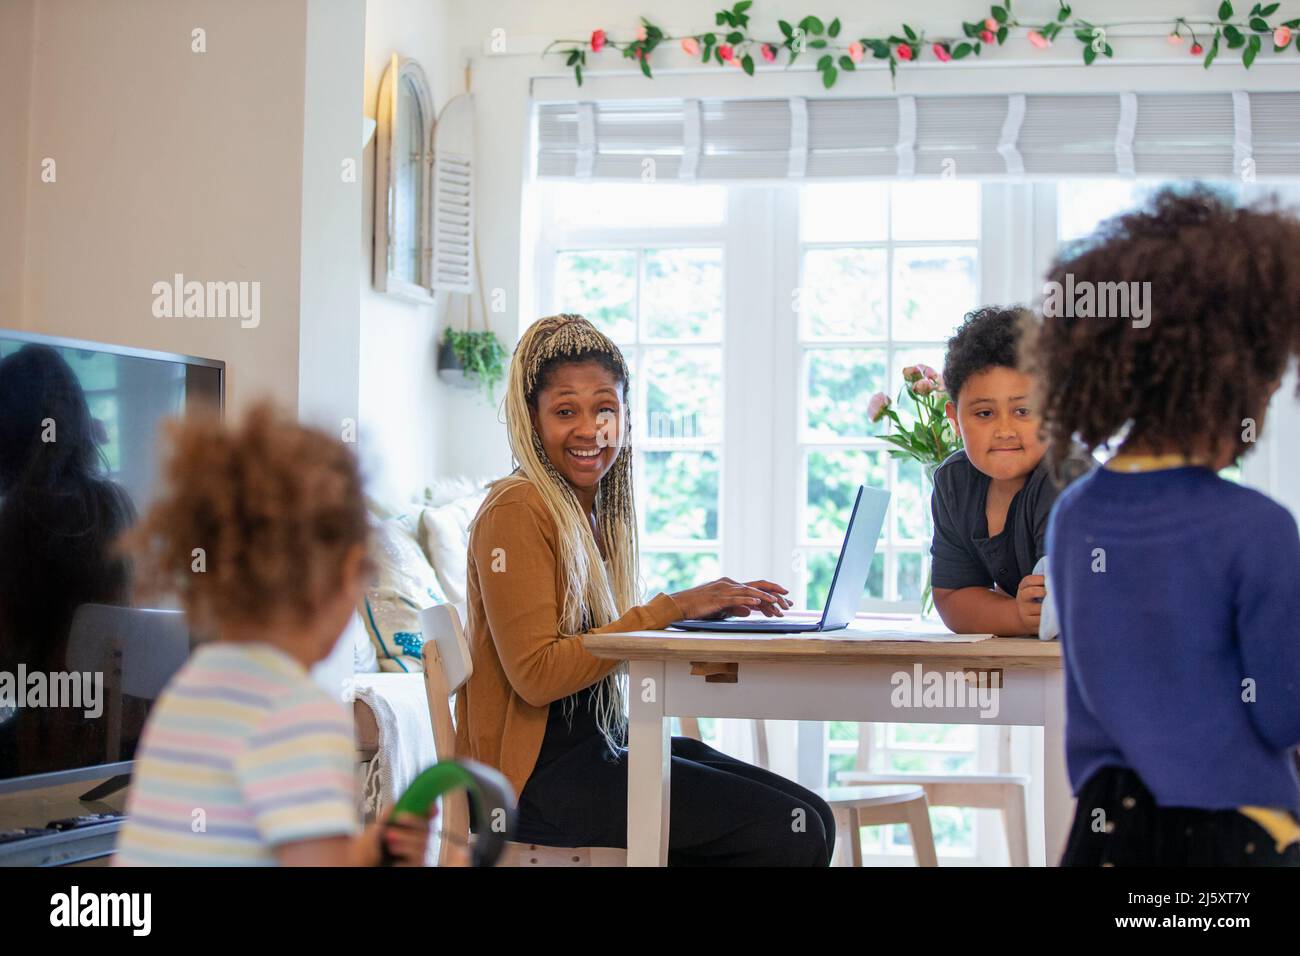 Happy mother working from home and watching kids play Stock Photo